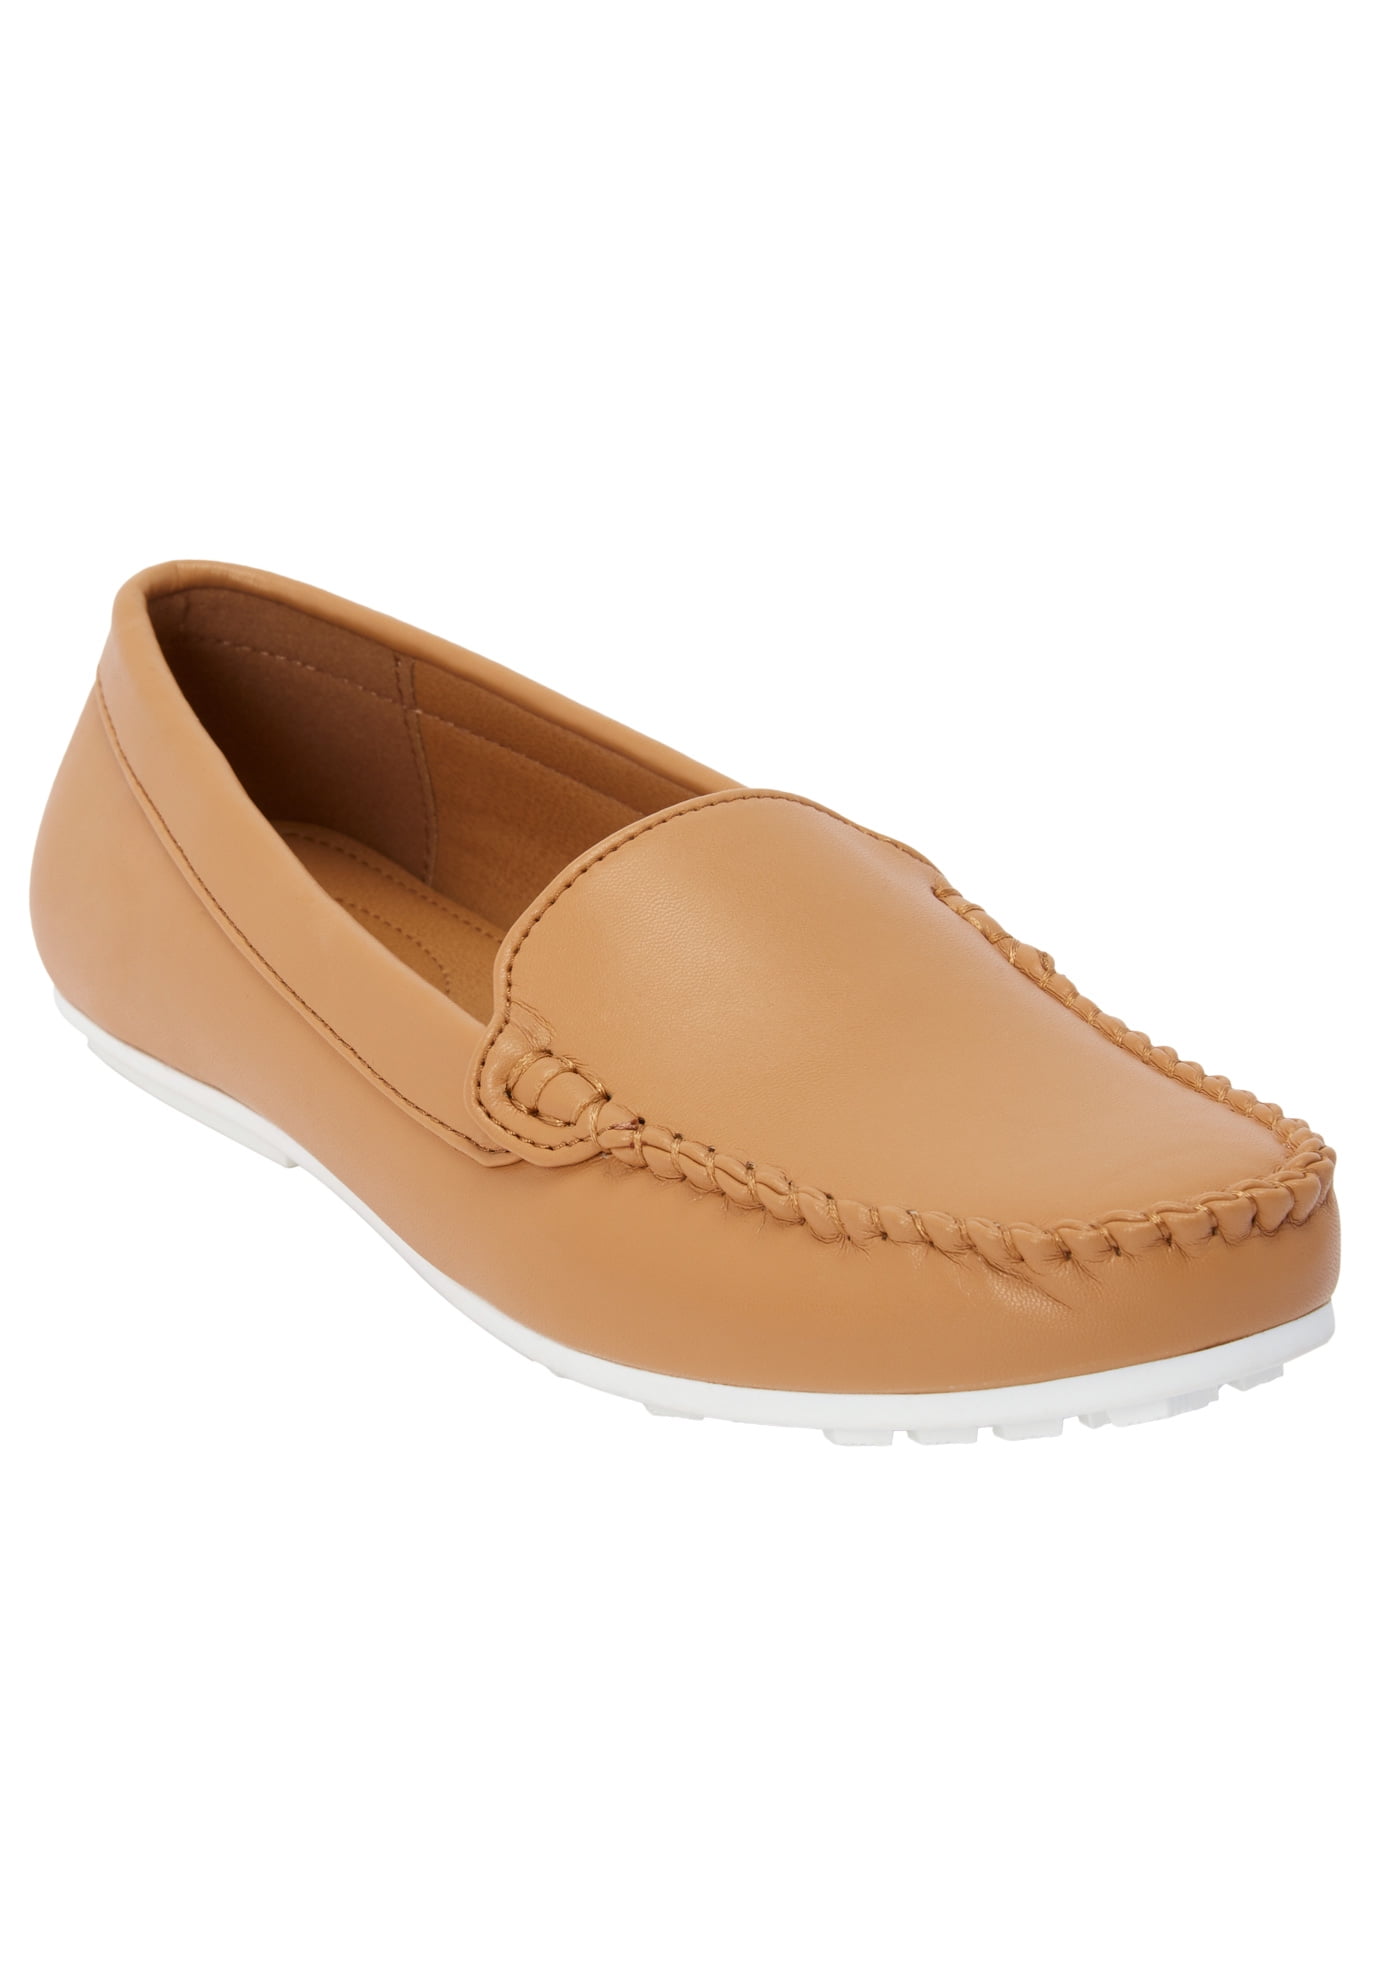 wide width moccasin shoes